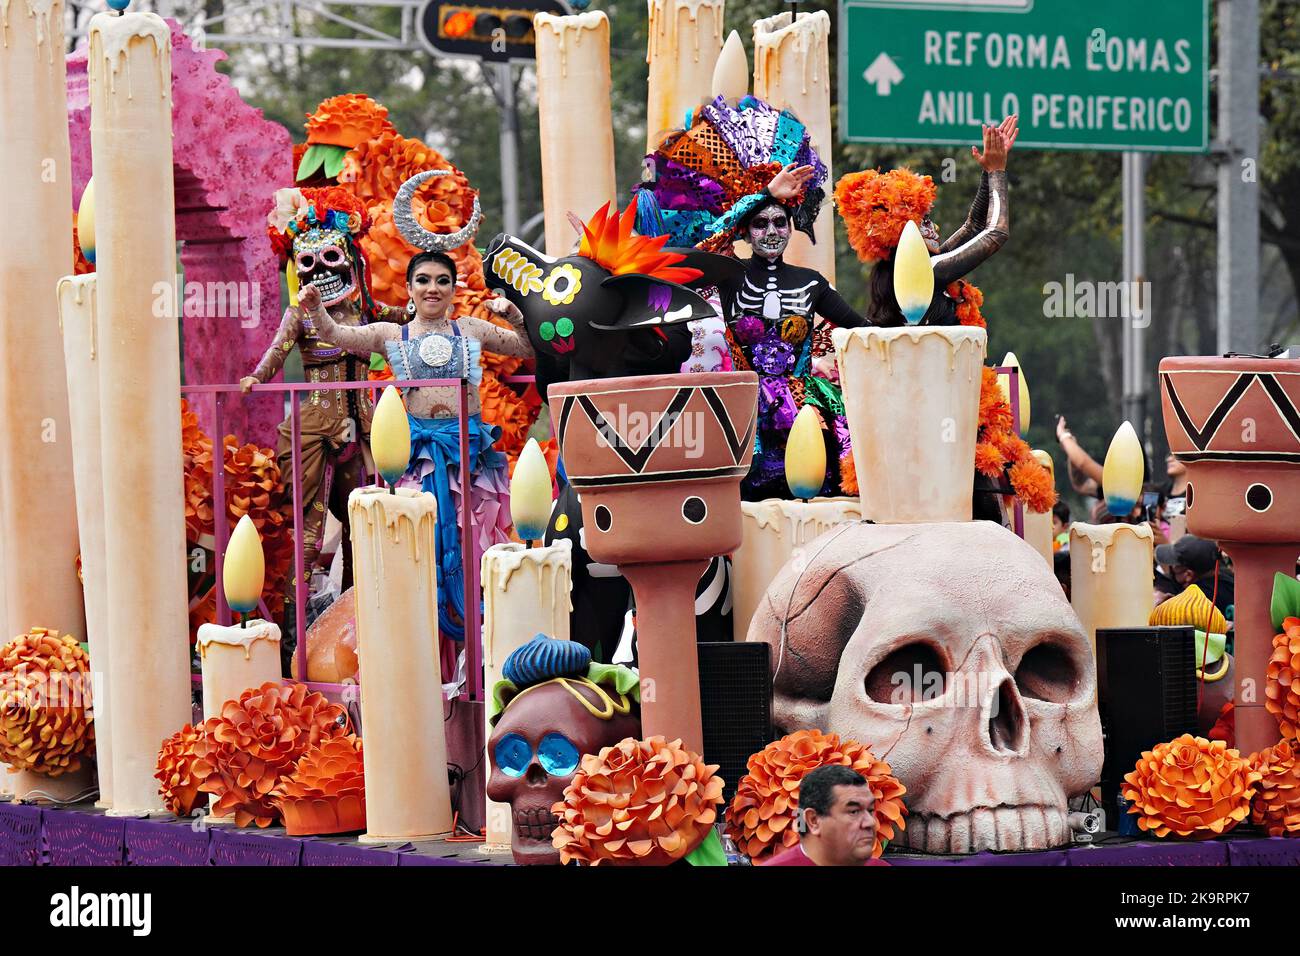 Mexico City, Mexico. 29th Oct, 2022. A parade float carries Beauty Queens and performers in skeleton costumes during the Grand Parade of the Dead to celebrate Dia de los Muertos holiday on Paseo de la Reforma, October 29, 2022 in Mexico City, Mexico. Credit: Richard Ellis/Richard Ellis/Alamy Live News Stock Photo